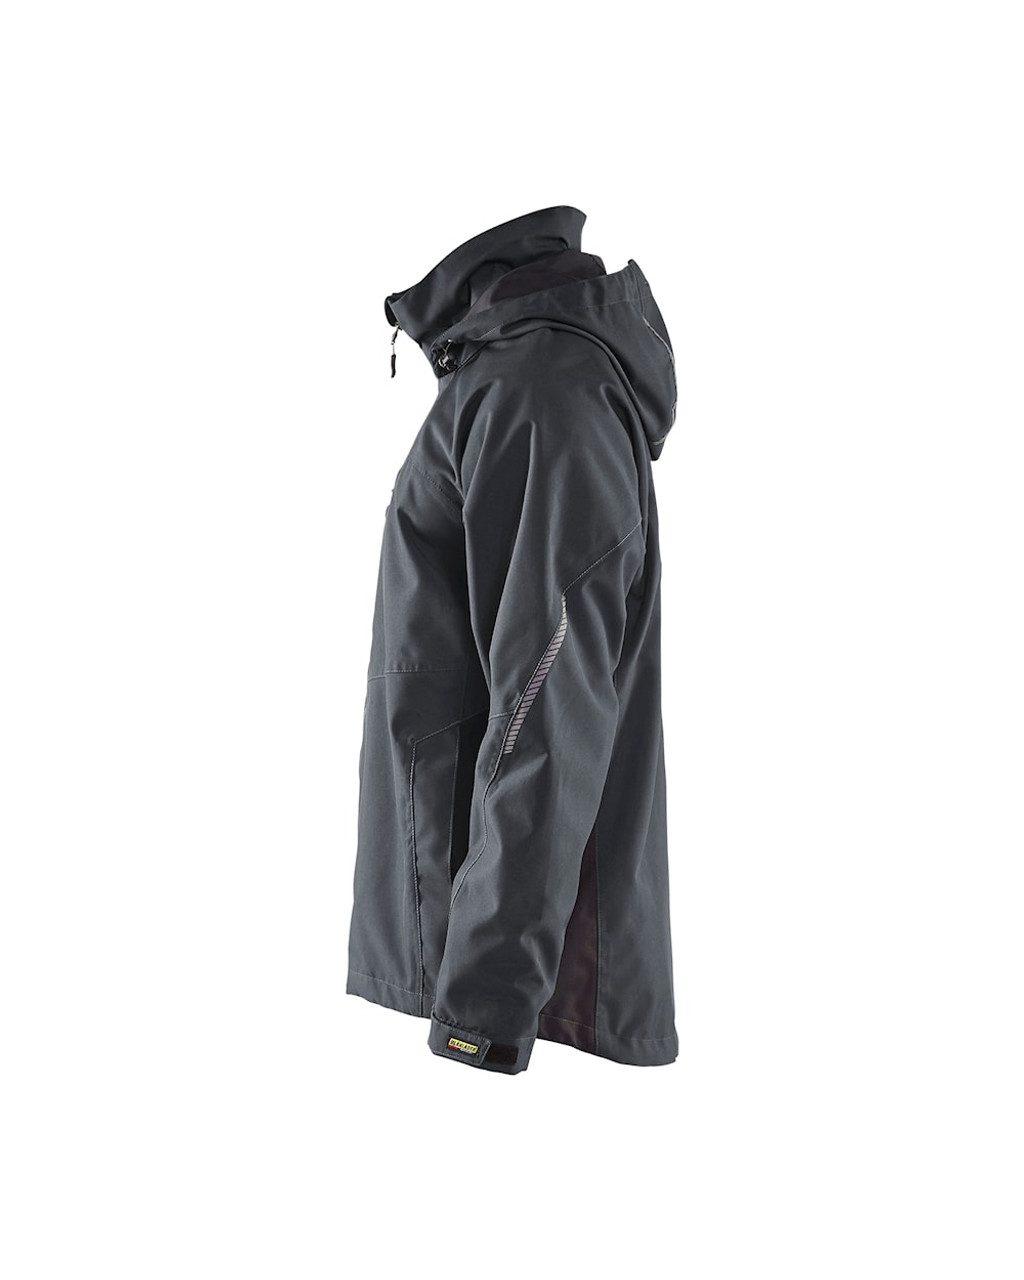 Buy online in Carpenters Jacket  4790  for Boilermakers that are comfortable and durable.